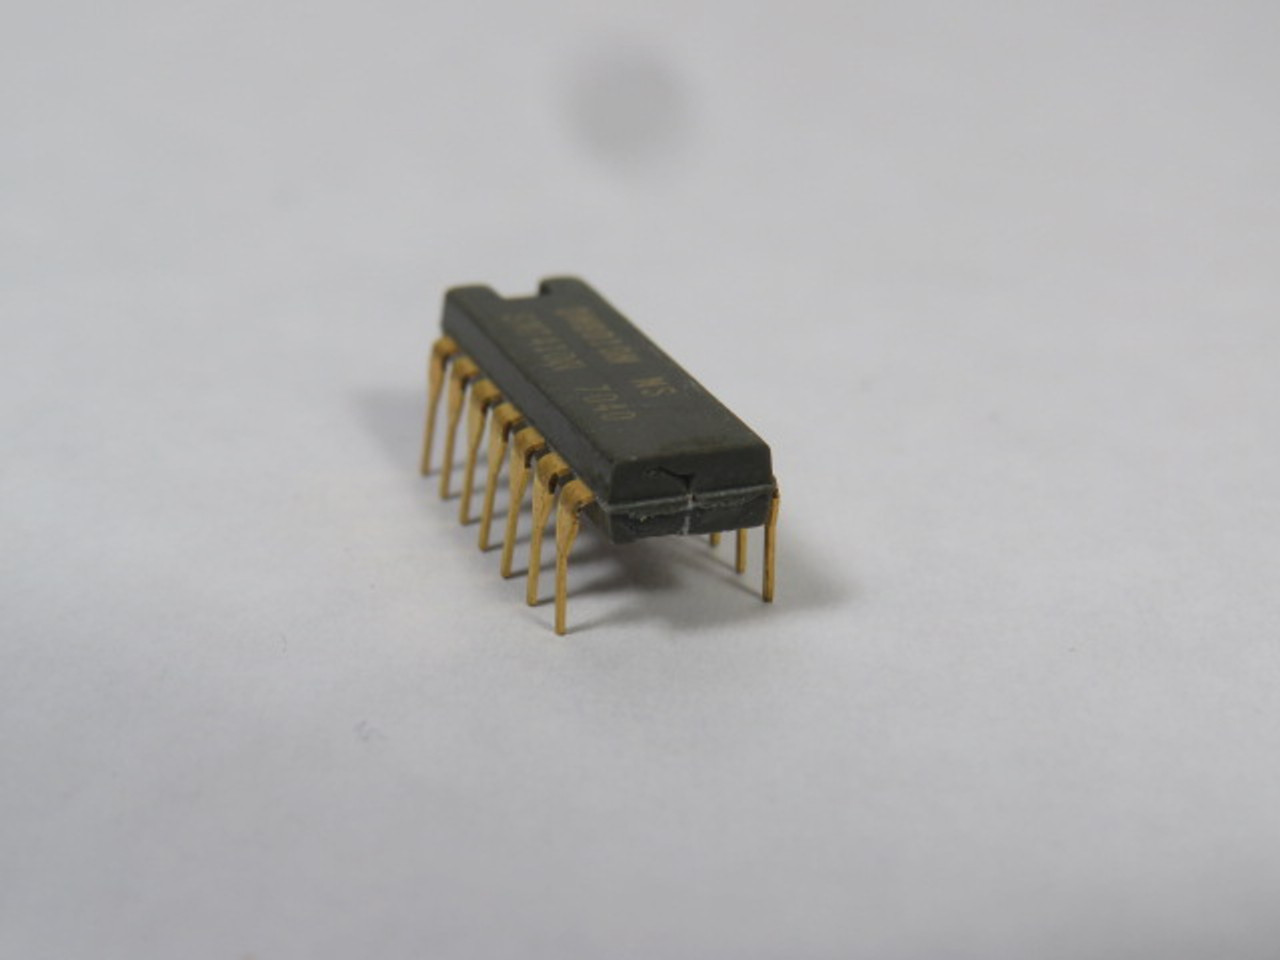 Generic SN7410N Triple 3-Input Positive NAND Gate IC Chip USED